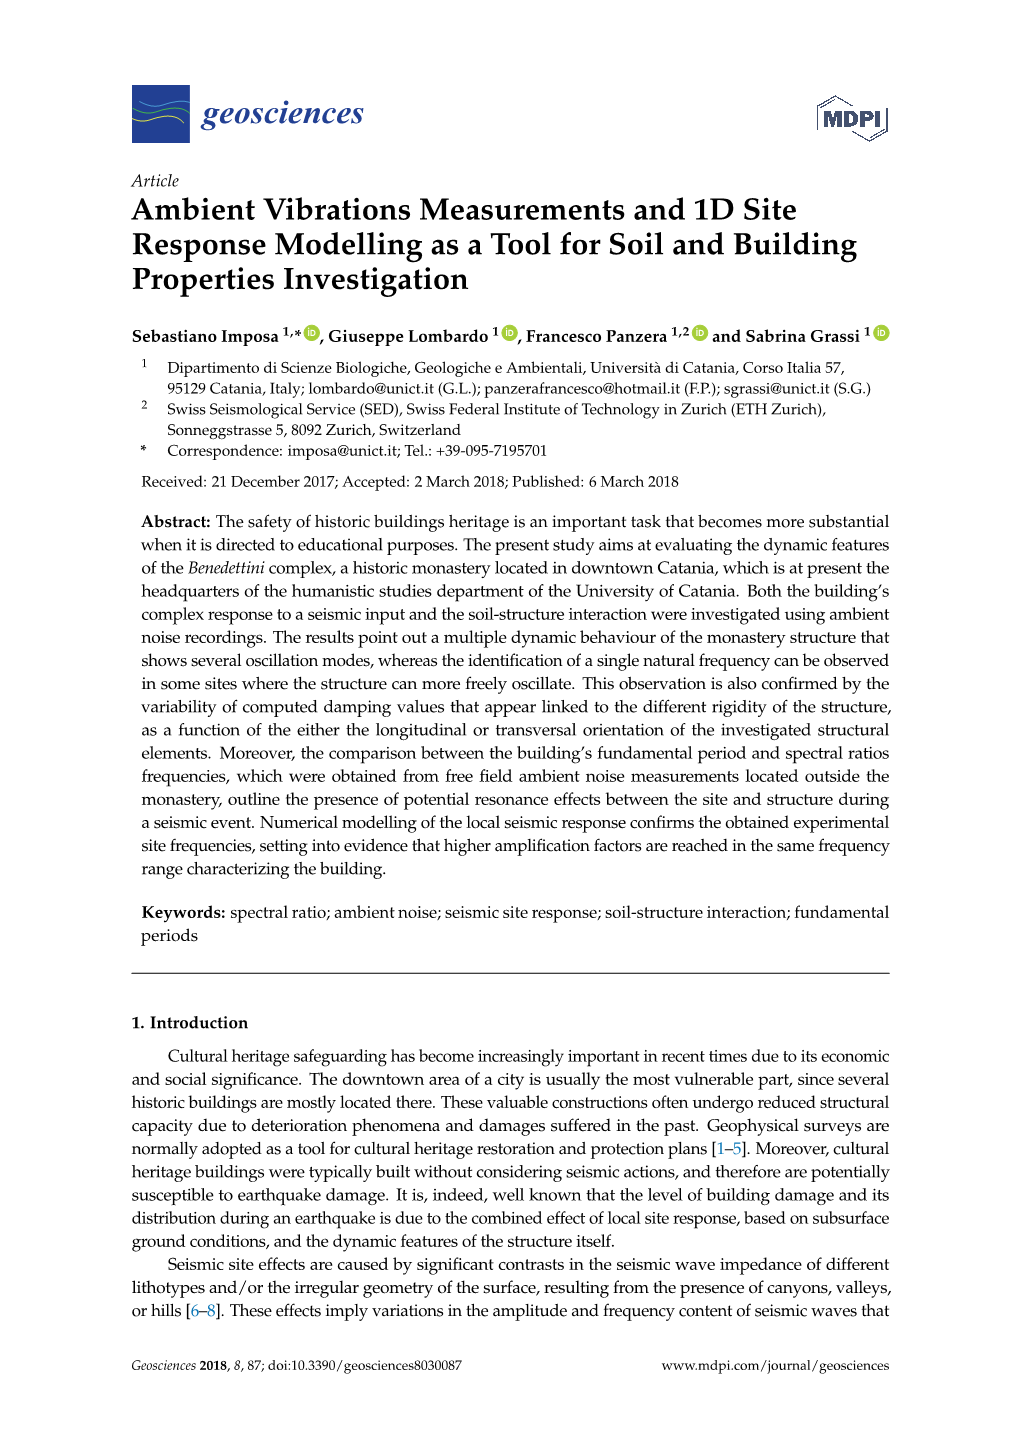 Ambient Vibrations Measurements and 1D Site Response Modelling As a Tool for Soil and Building Properties Investigation